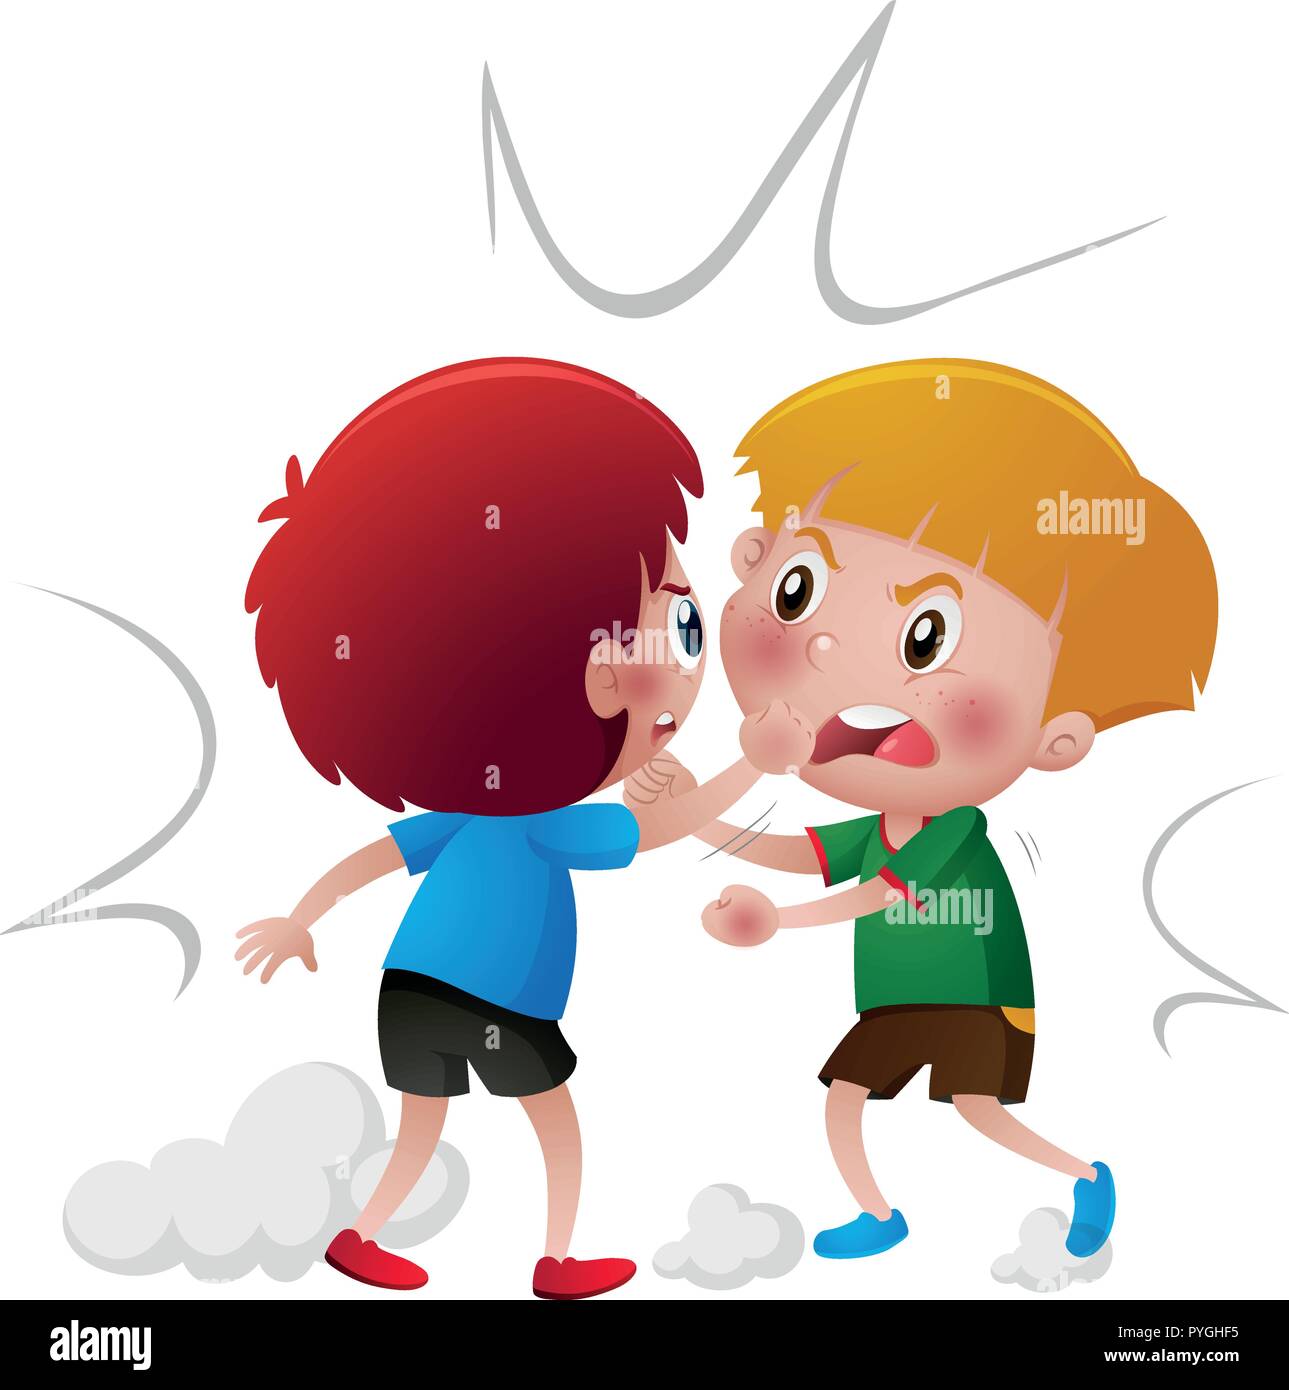 Angry boys fighting each other illustration Stock Vector